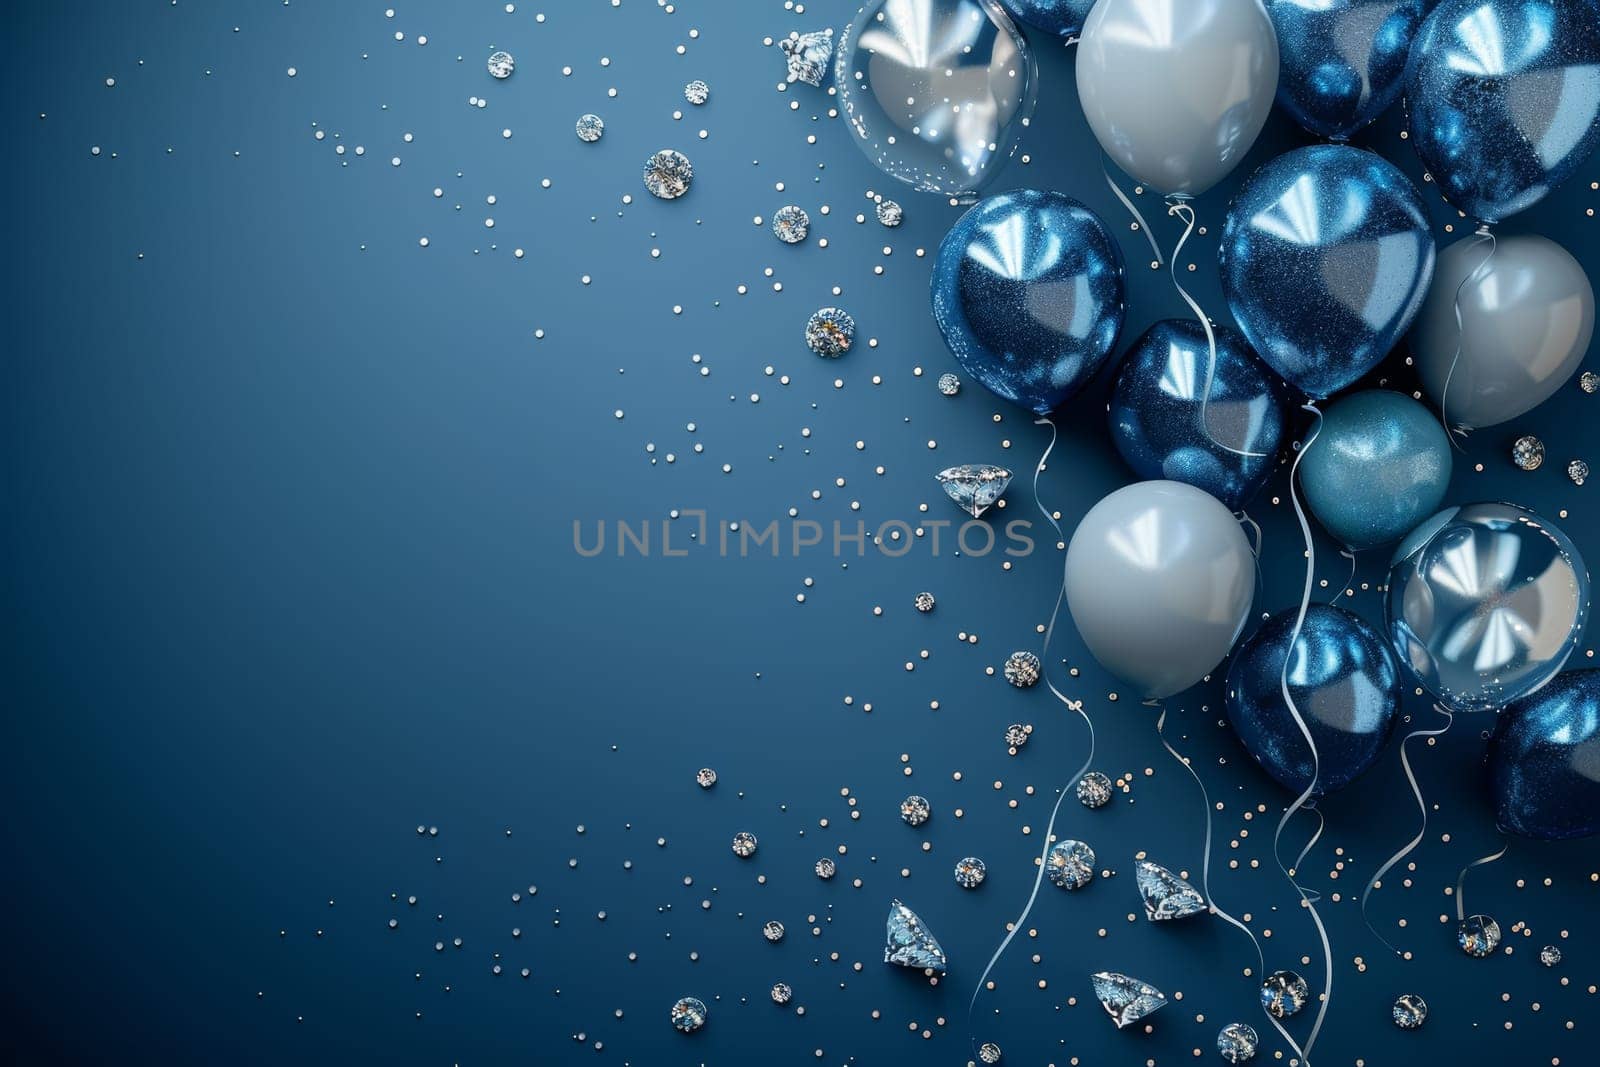 A blue and silver balloon display with a blue background. The balloons are scattered around the background, creating a festive atmosphere